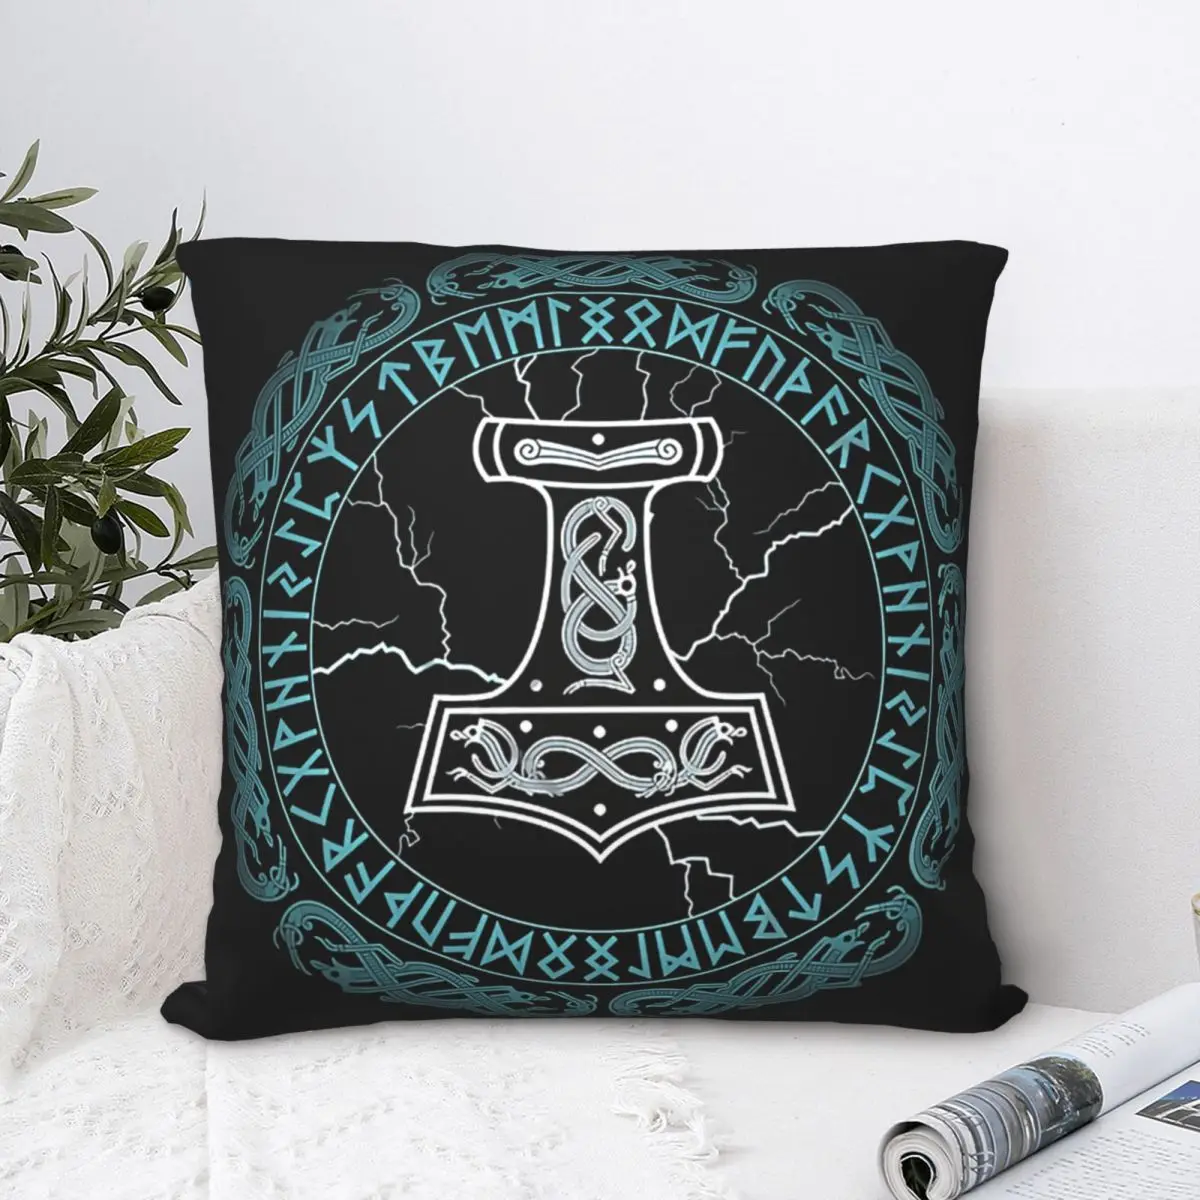 

Mjolnir Hammer Of Thor Runes Throw Pillow Case Viking Norse Mythology Backpack Cushions Case DIY Printed Fashion For Chair Decor